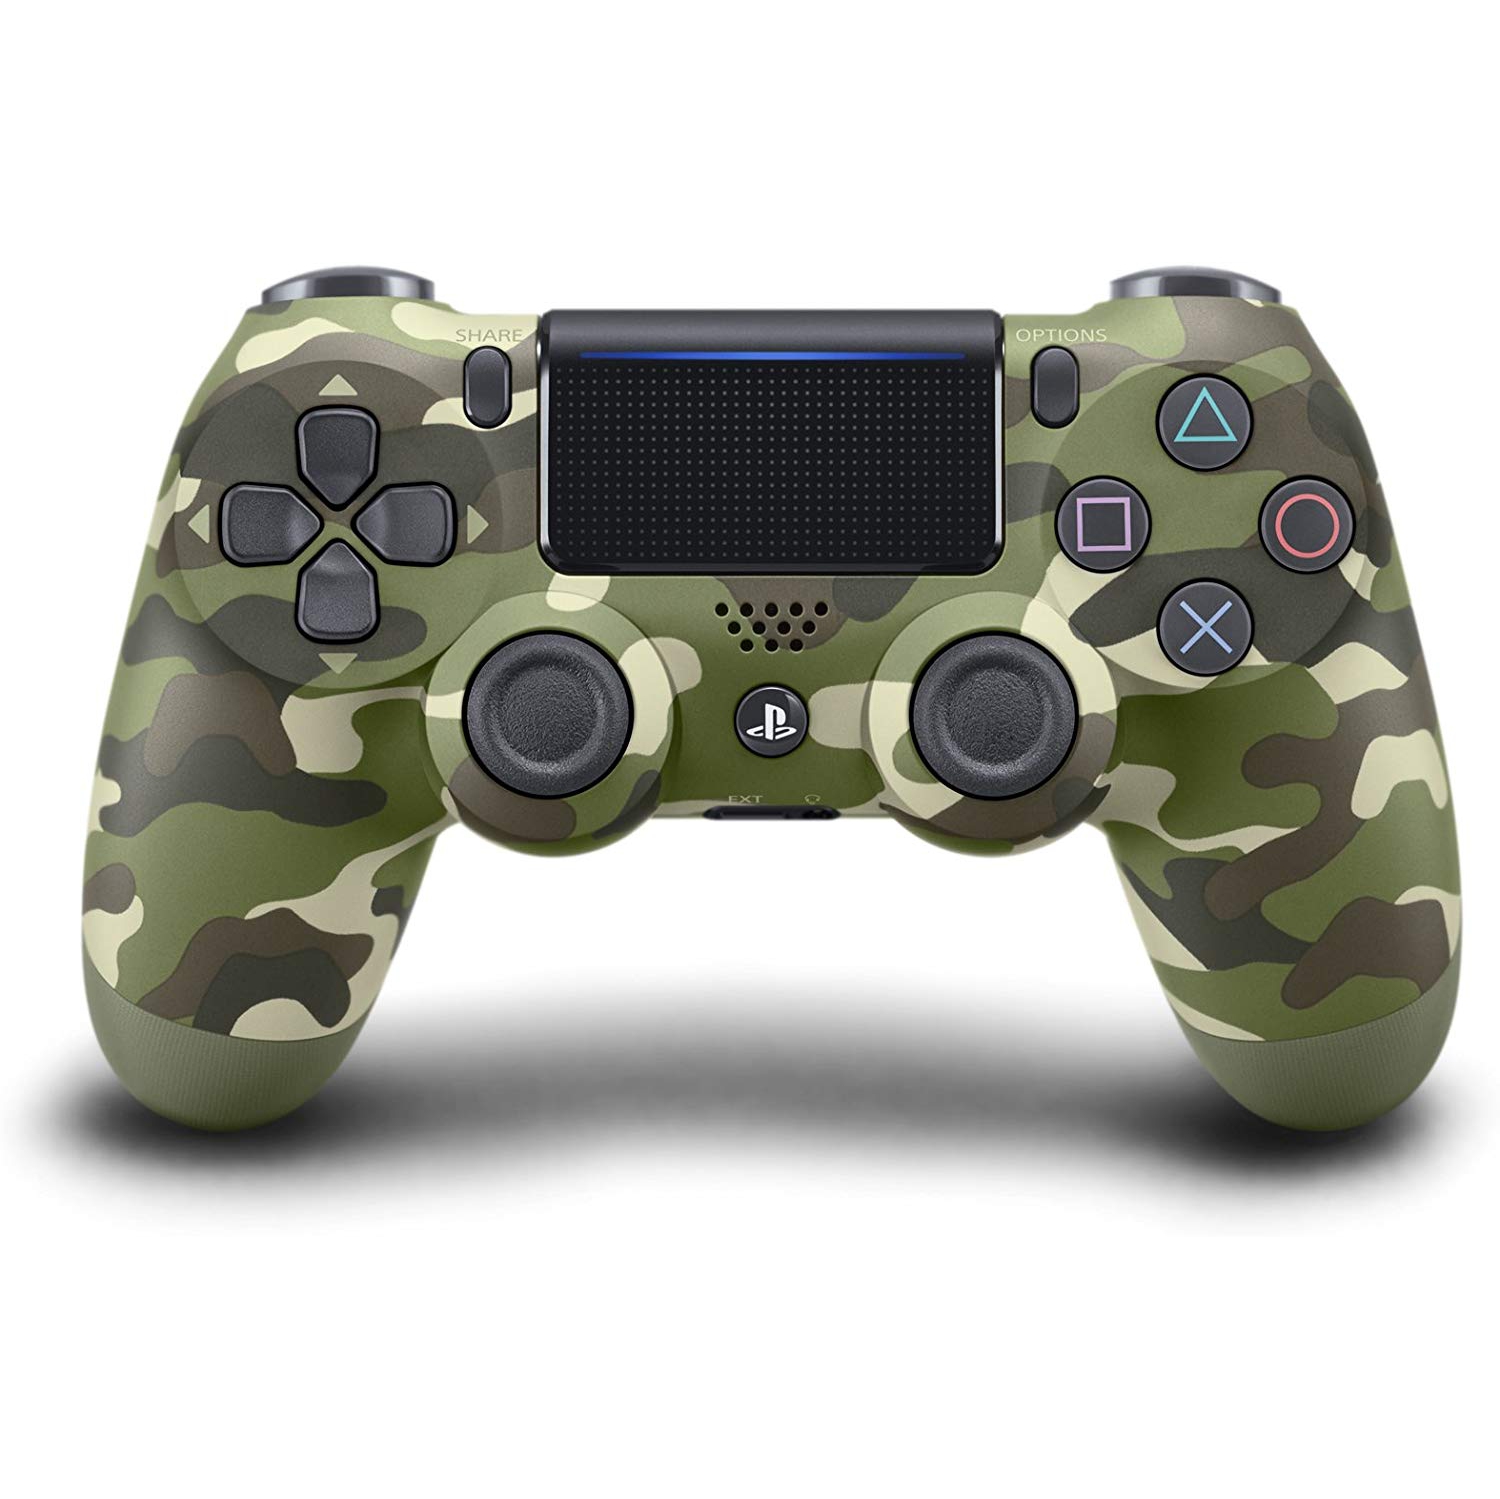 Sony Playstation 4 Dualshock PS4 Wireless Controller Green Camo - CERTIFIED REFURBISHED